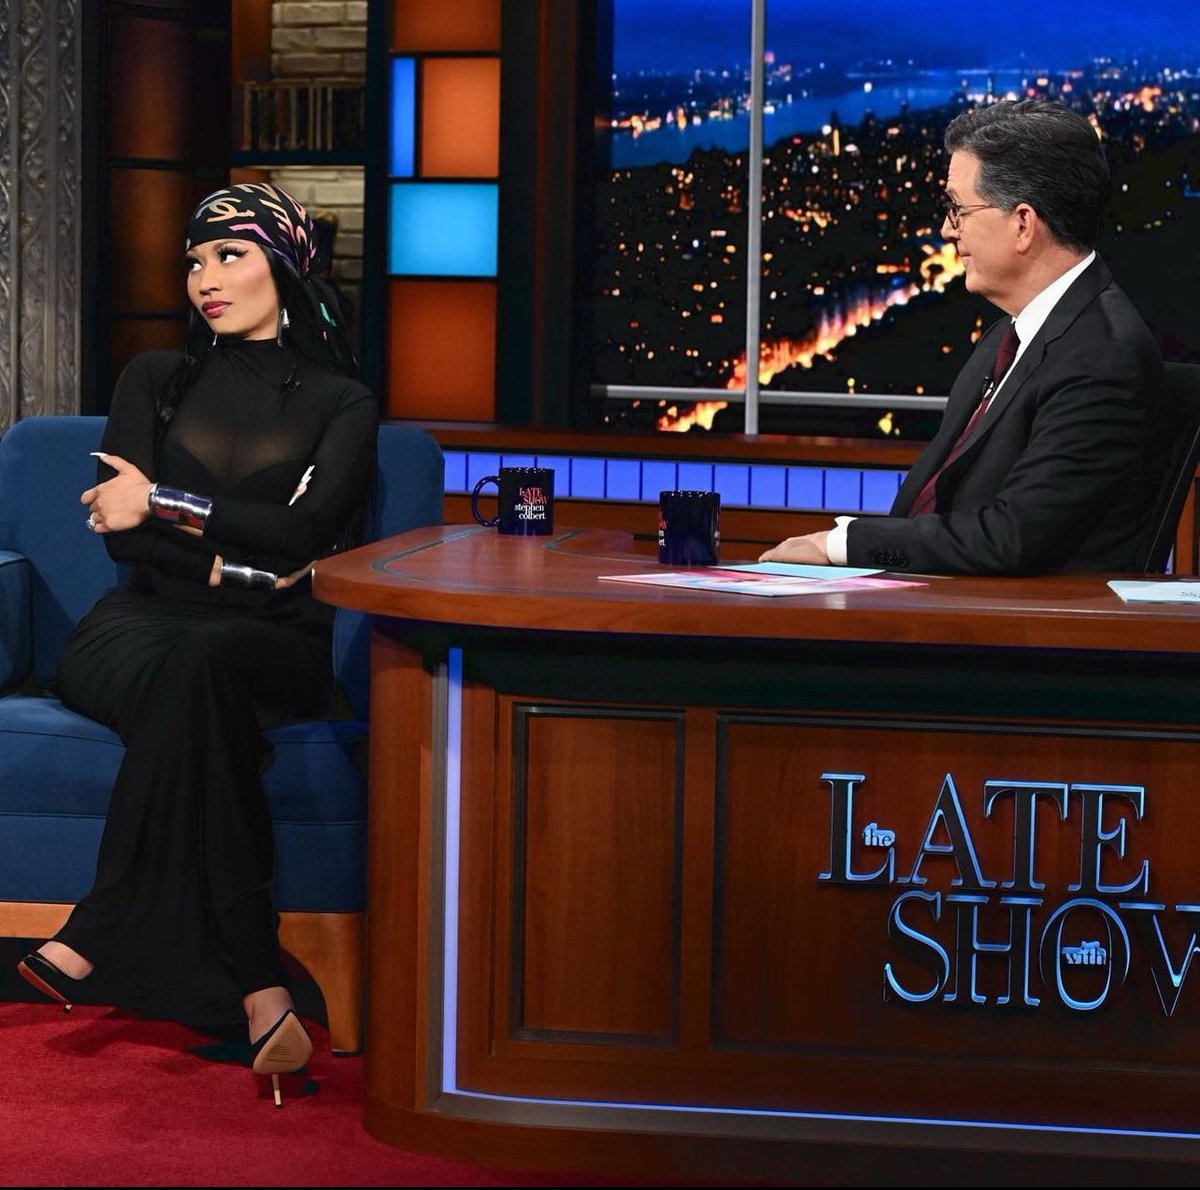 This show is about to be funny af 😭😭 they are the best duo #TheLateShow